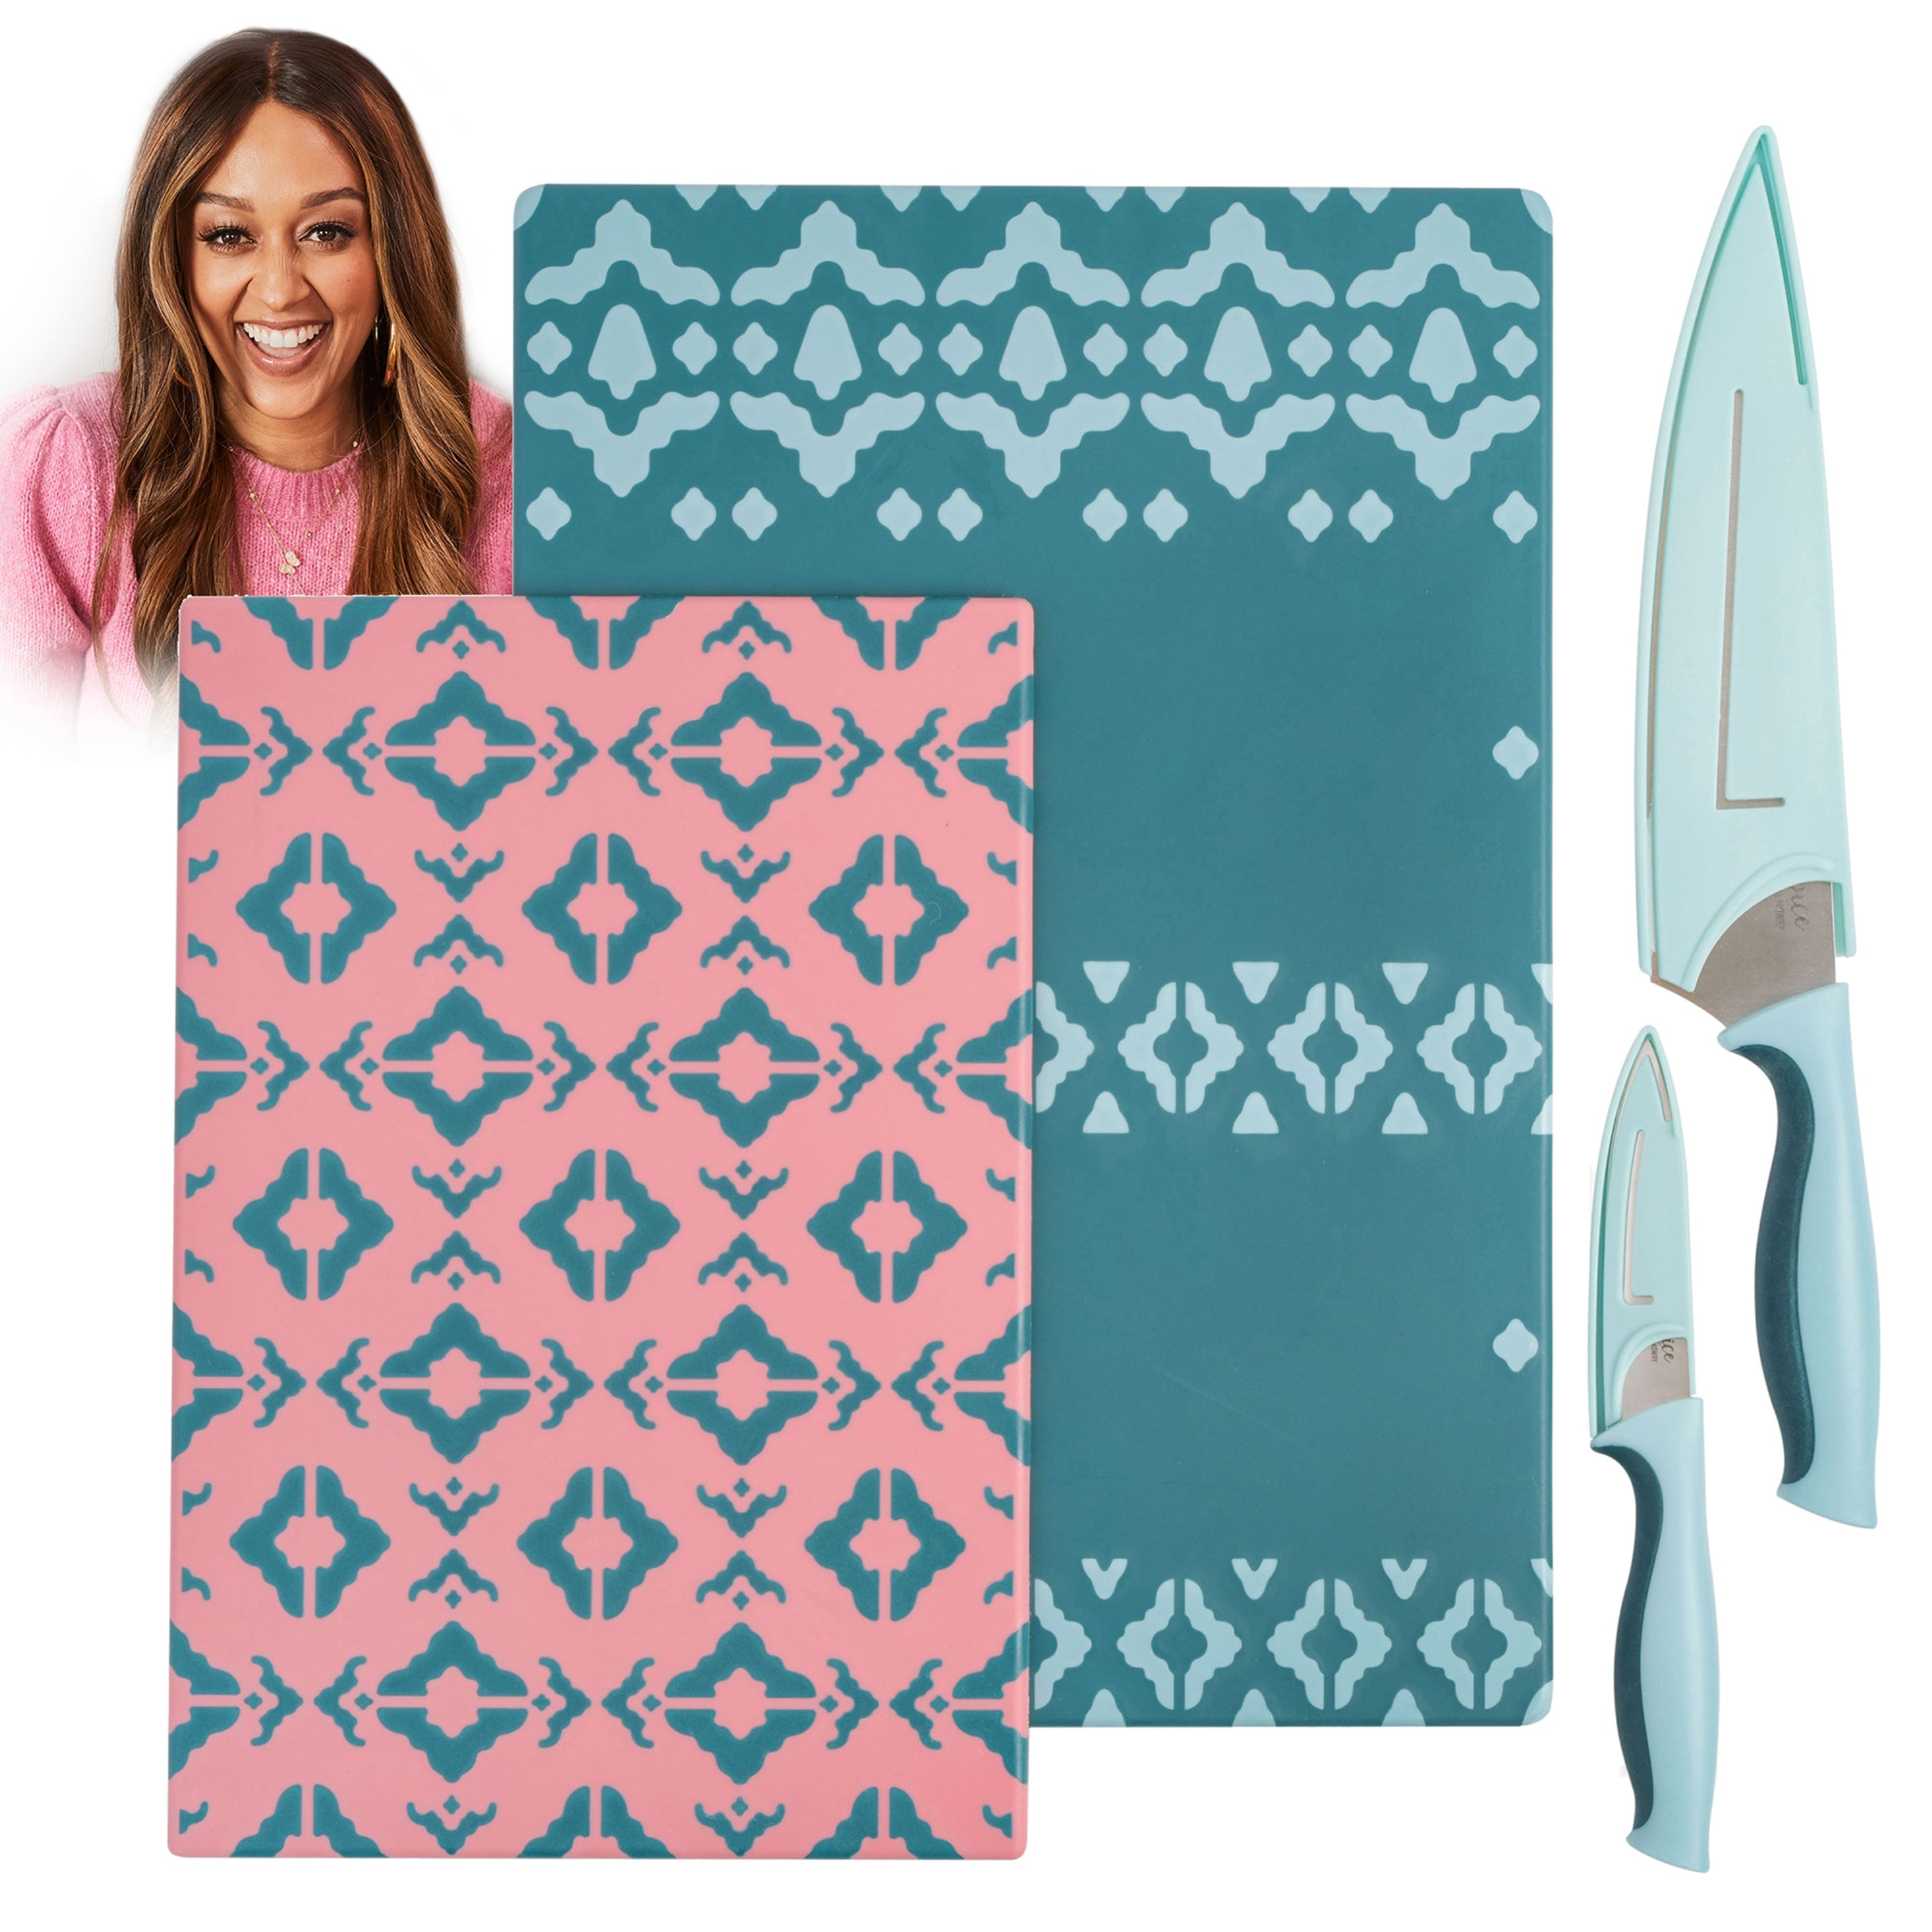 Spice by Tia Mowry 6-Piece Cutlery Set w/ Cutting Board, Stainless Steel Knives and Sheaths